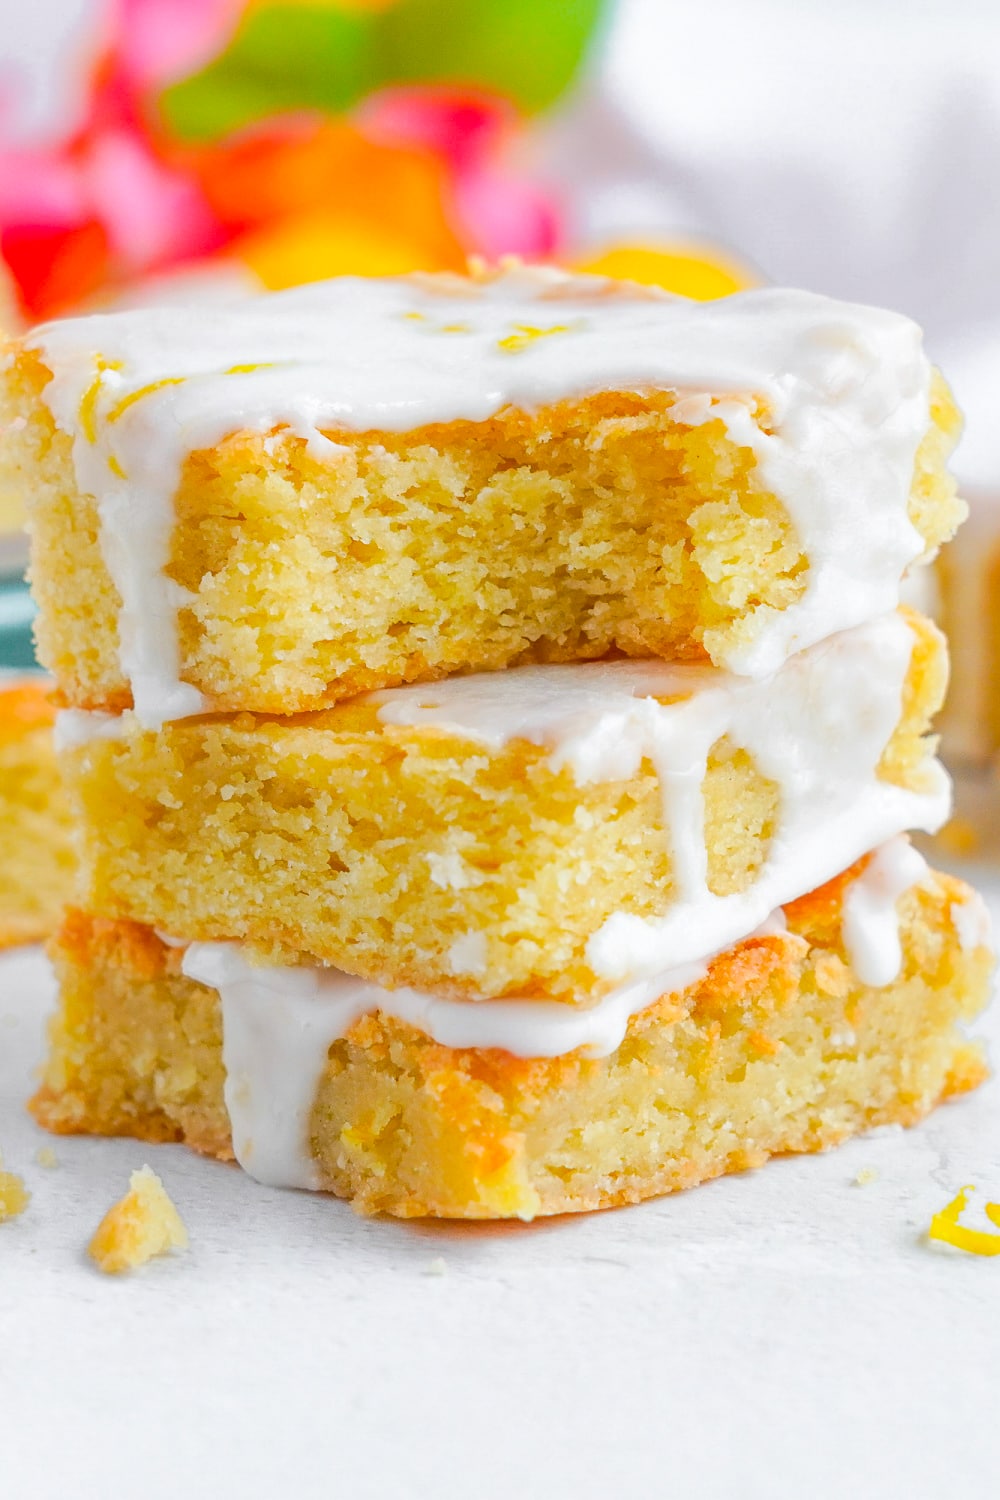 The Lemon Sugar Cookie Bars topped with lemon sugar glaze in a stack on a white plate.